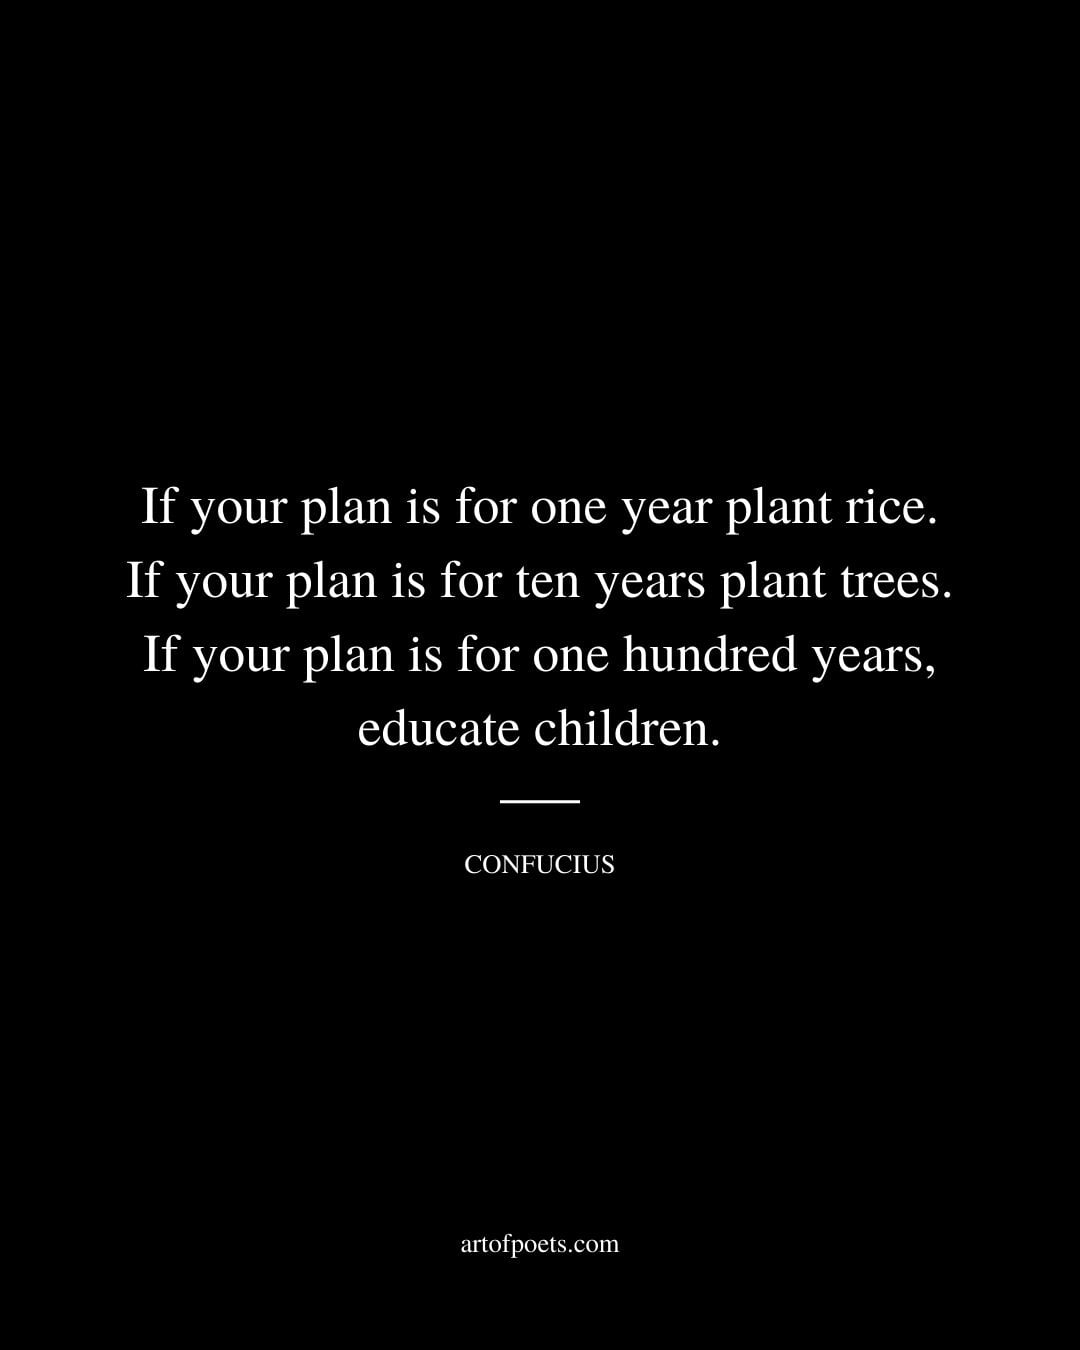 If your plan is for one year plant rice. If your plan is for ten years plant trees. If your plan is for one hundred years educate children